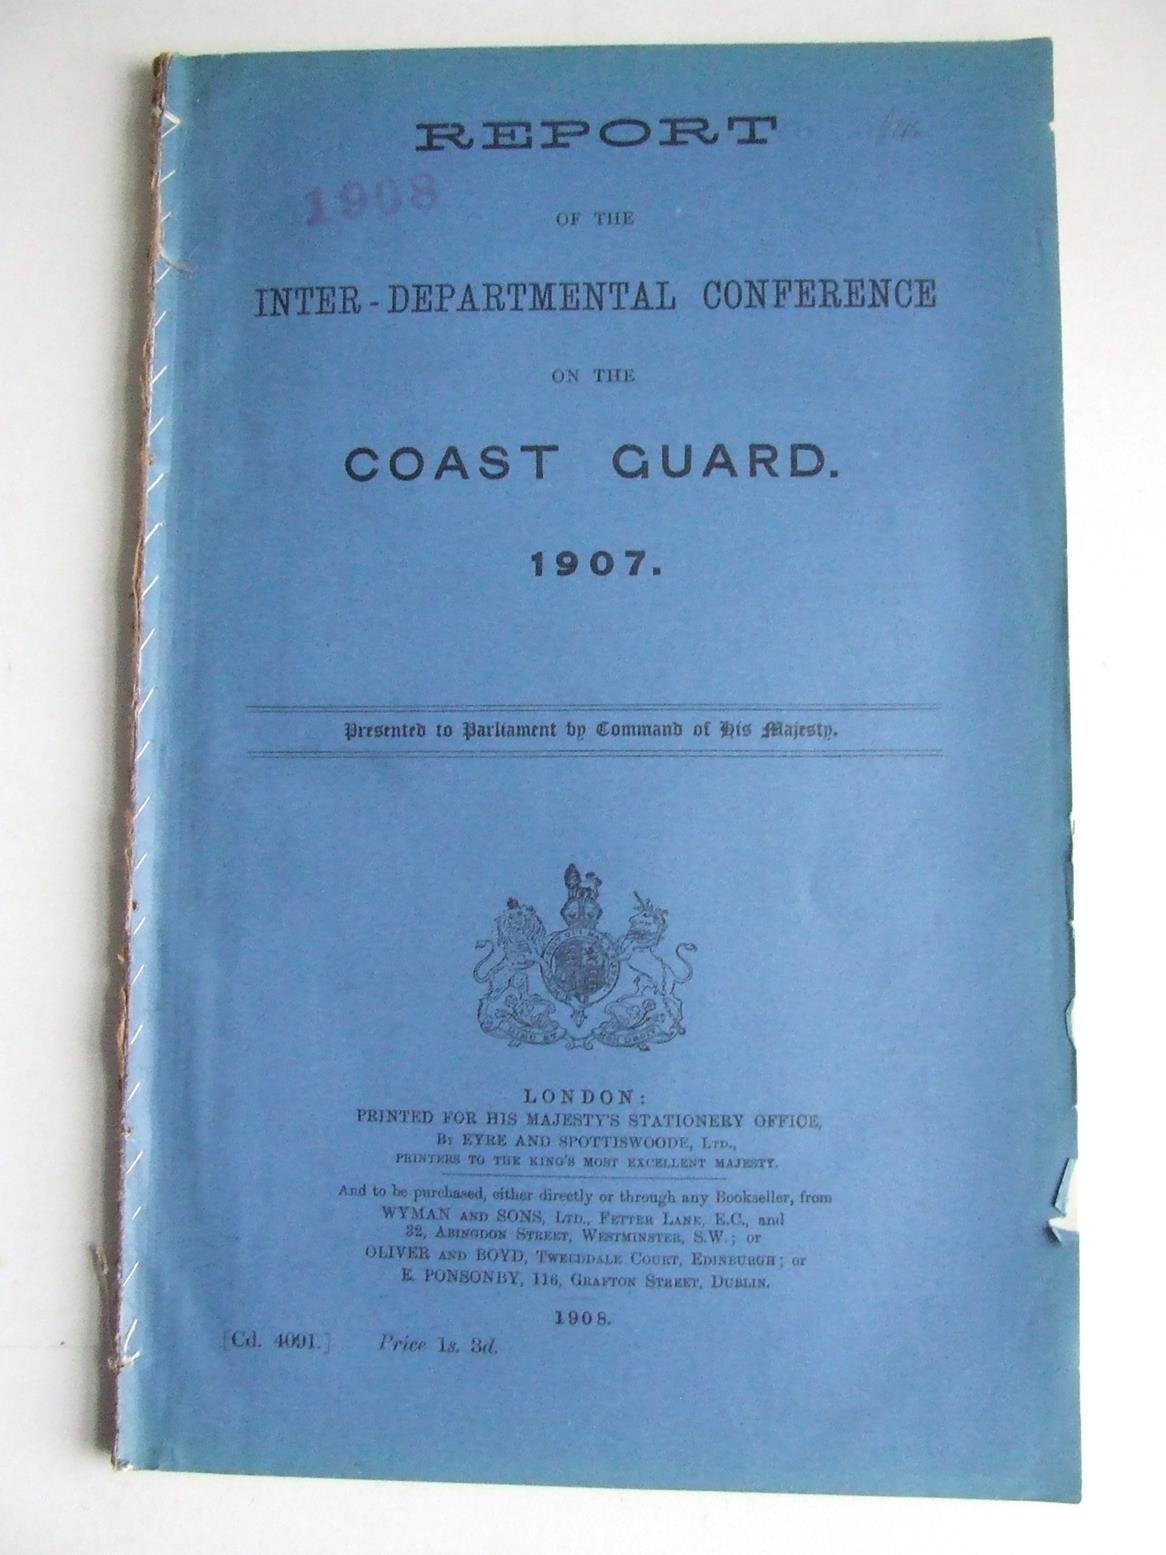 Report of the Inter-Departmental Conference on the Coast Guard, 1907